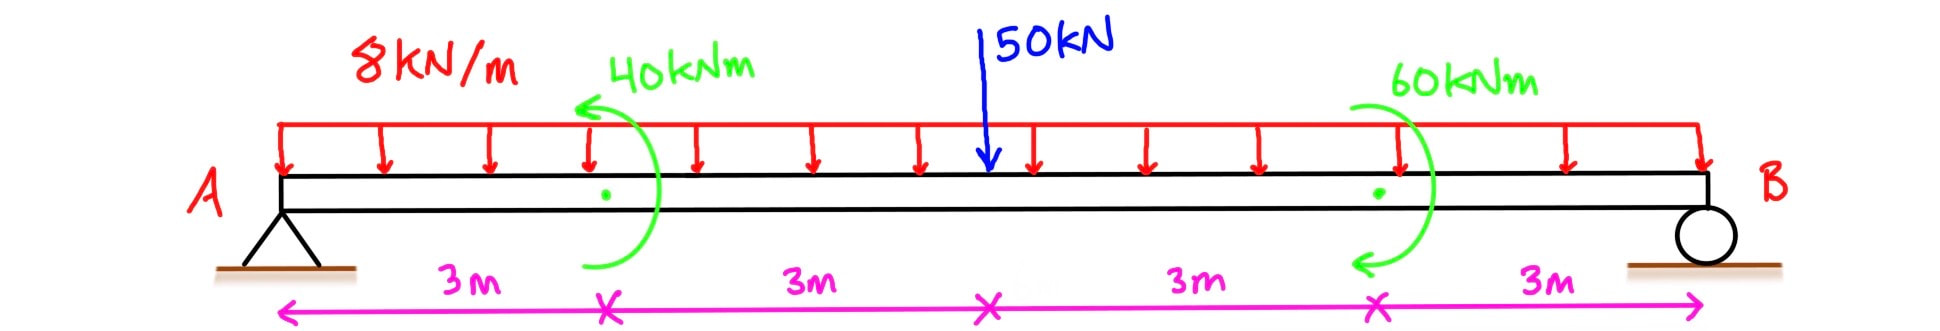 Shear force and bending moment diagram example with solution